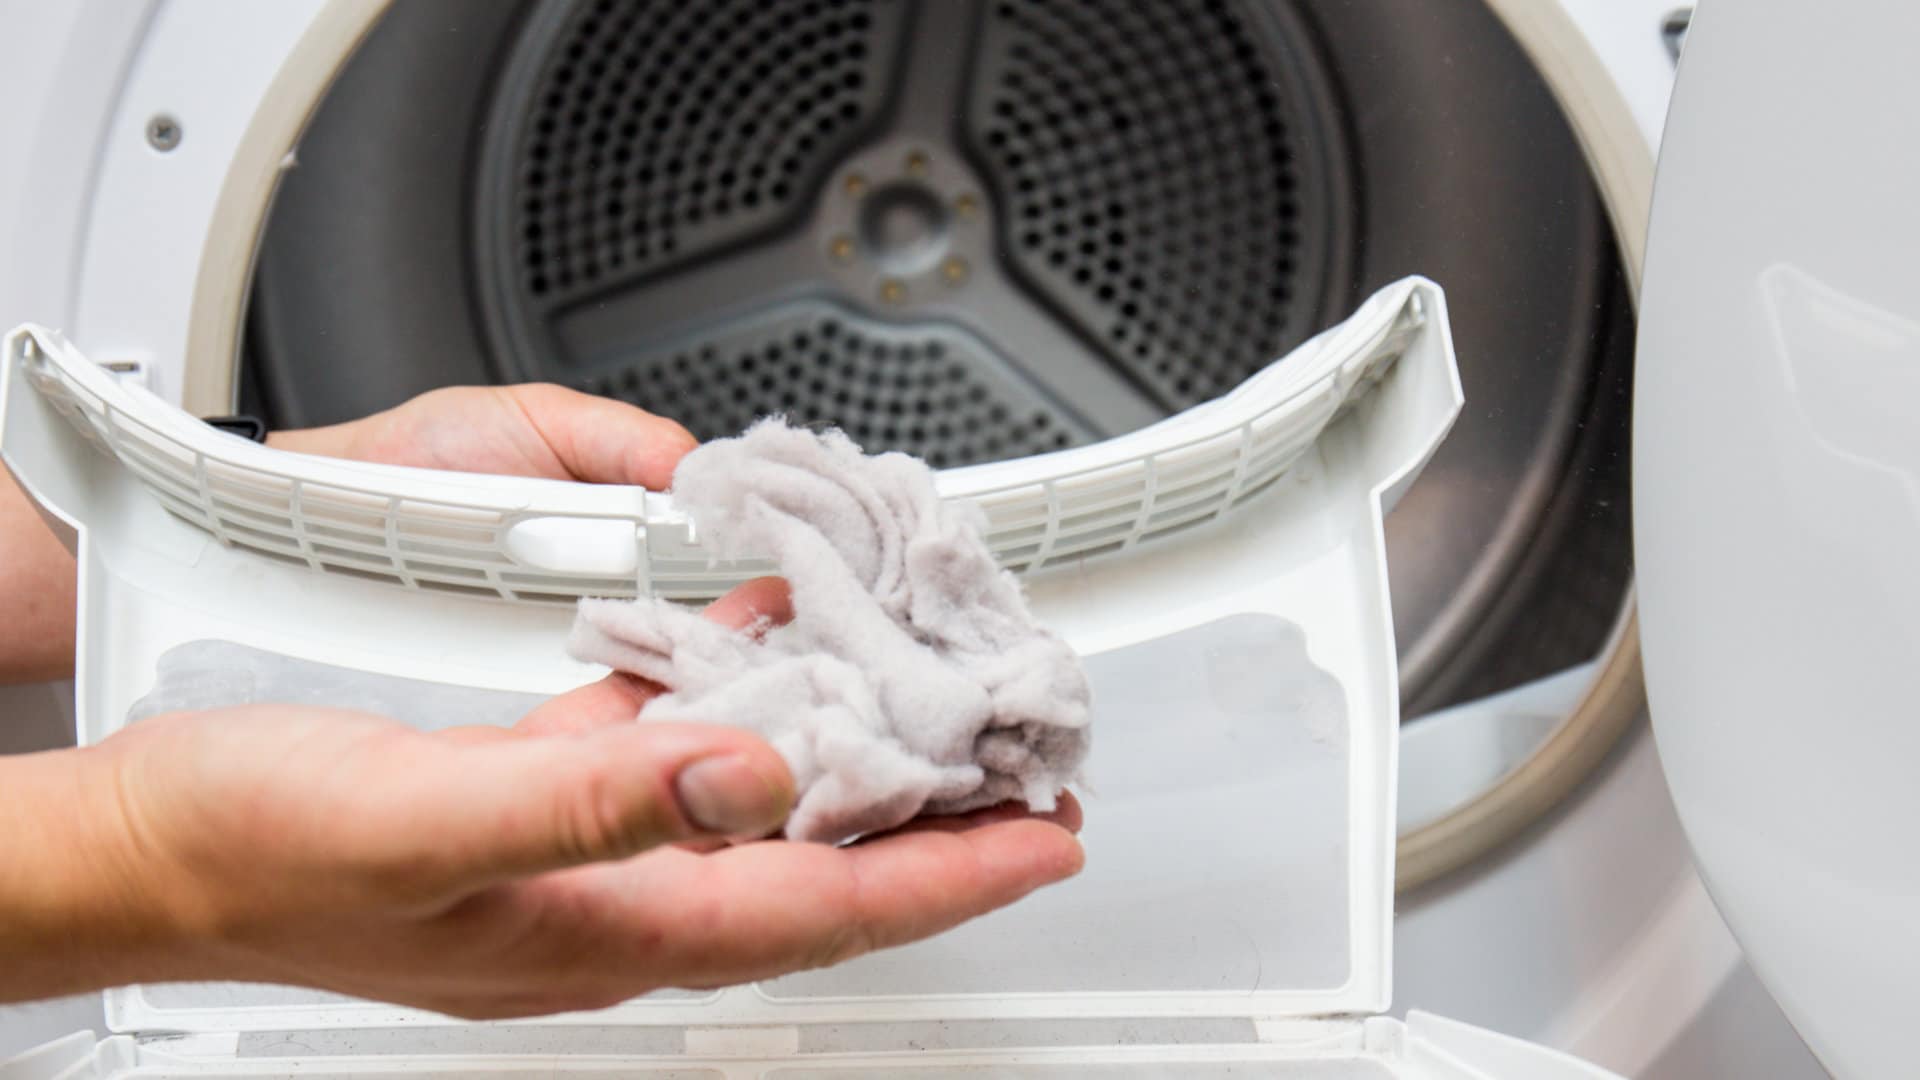 How To Clean An LG Dryer Vent